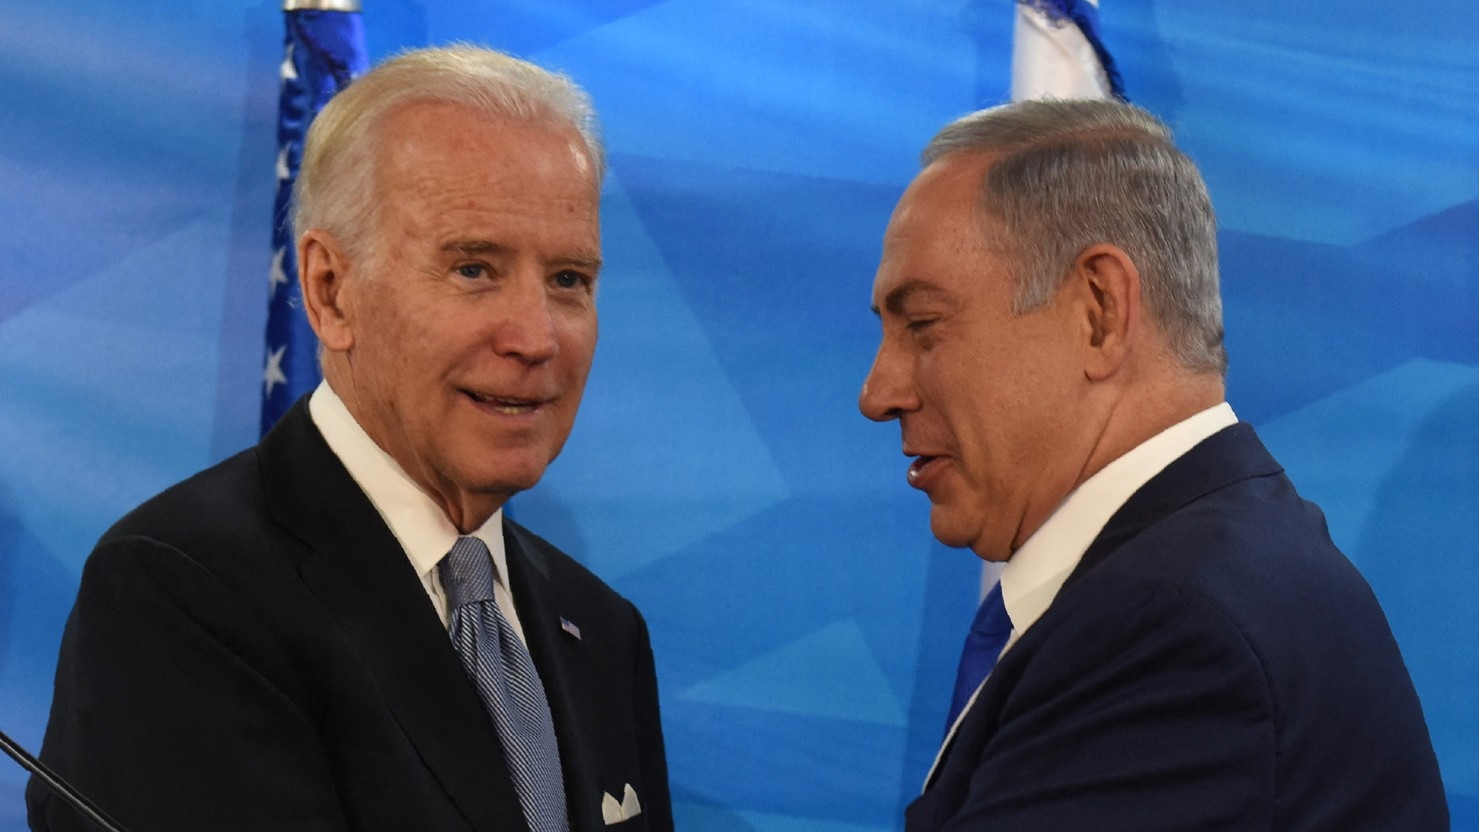 Then-US Vice President Joe Biden and Israeli Prime Minister Benjamin Netanyahu shake hands after giving joint statements in the prime minister's office in Jerusalem on 9 March 2016.